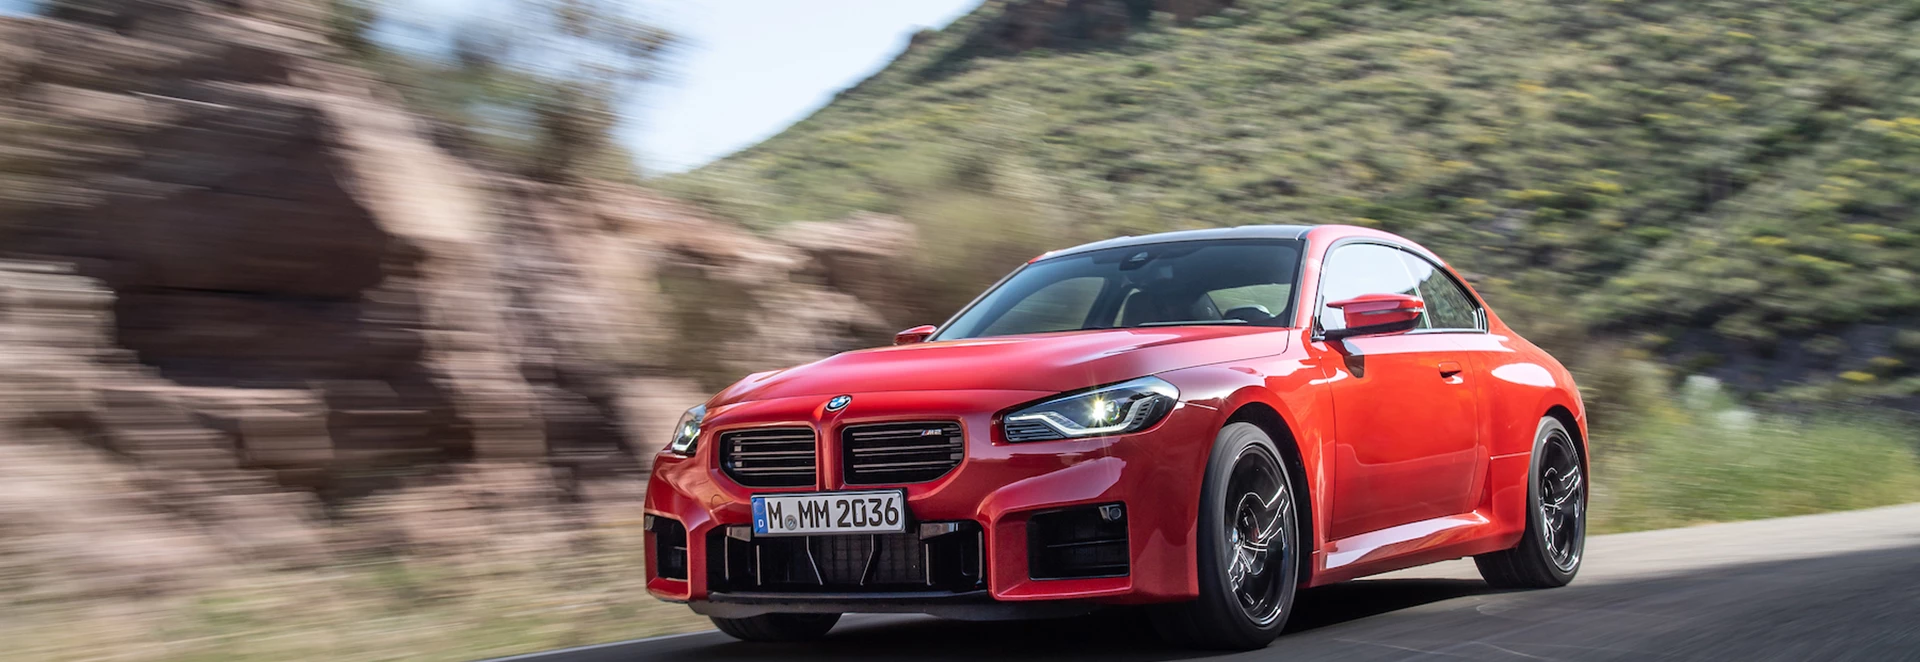 New BMW M2 revealed: Here’s what you need to know 